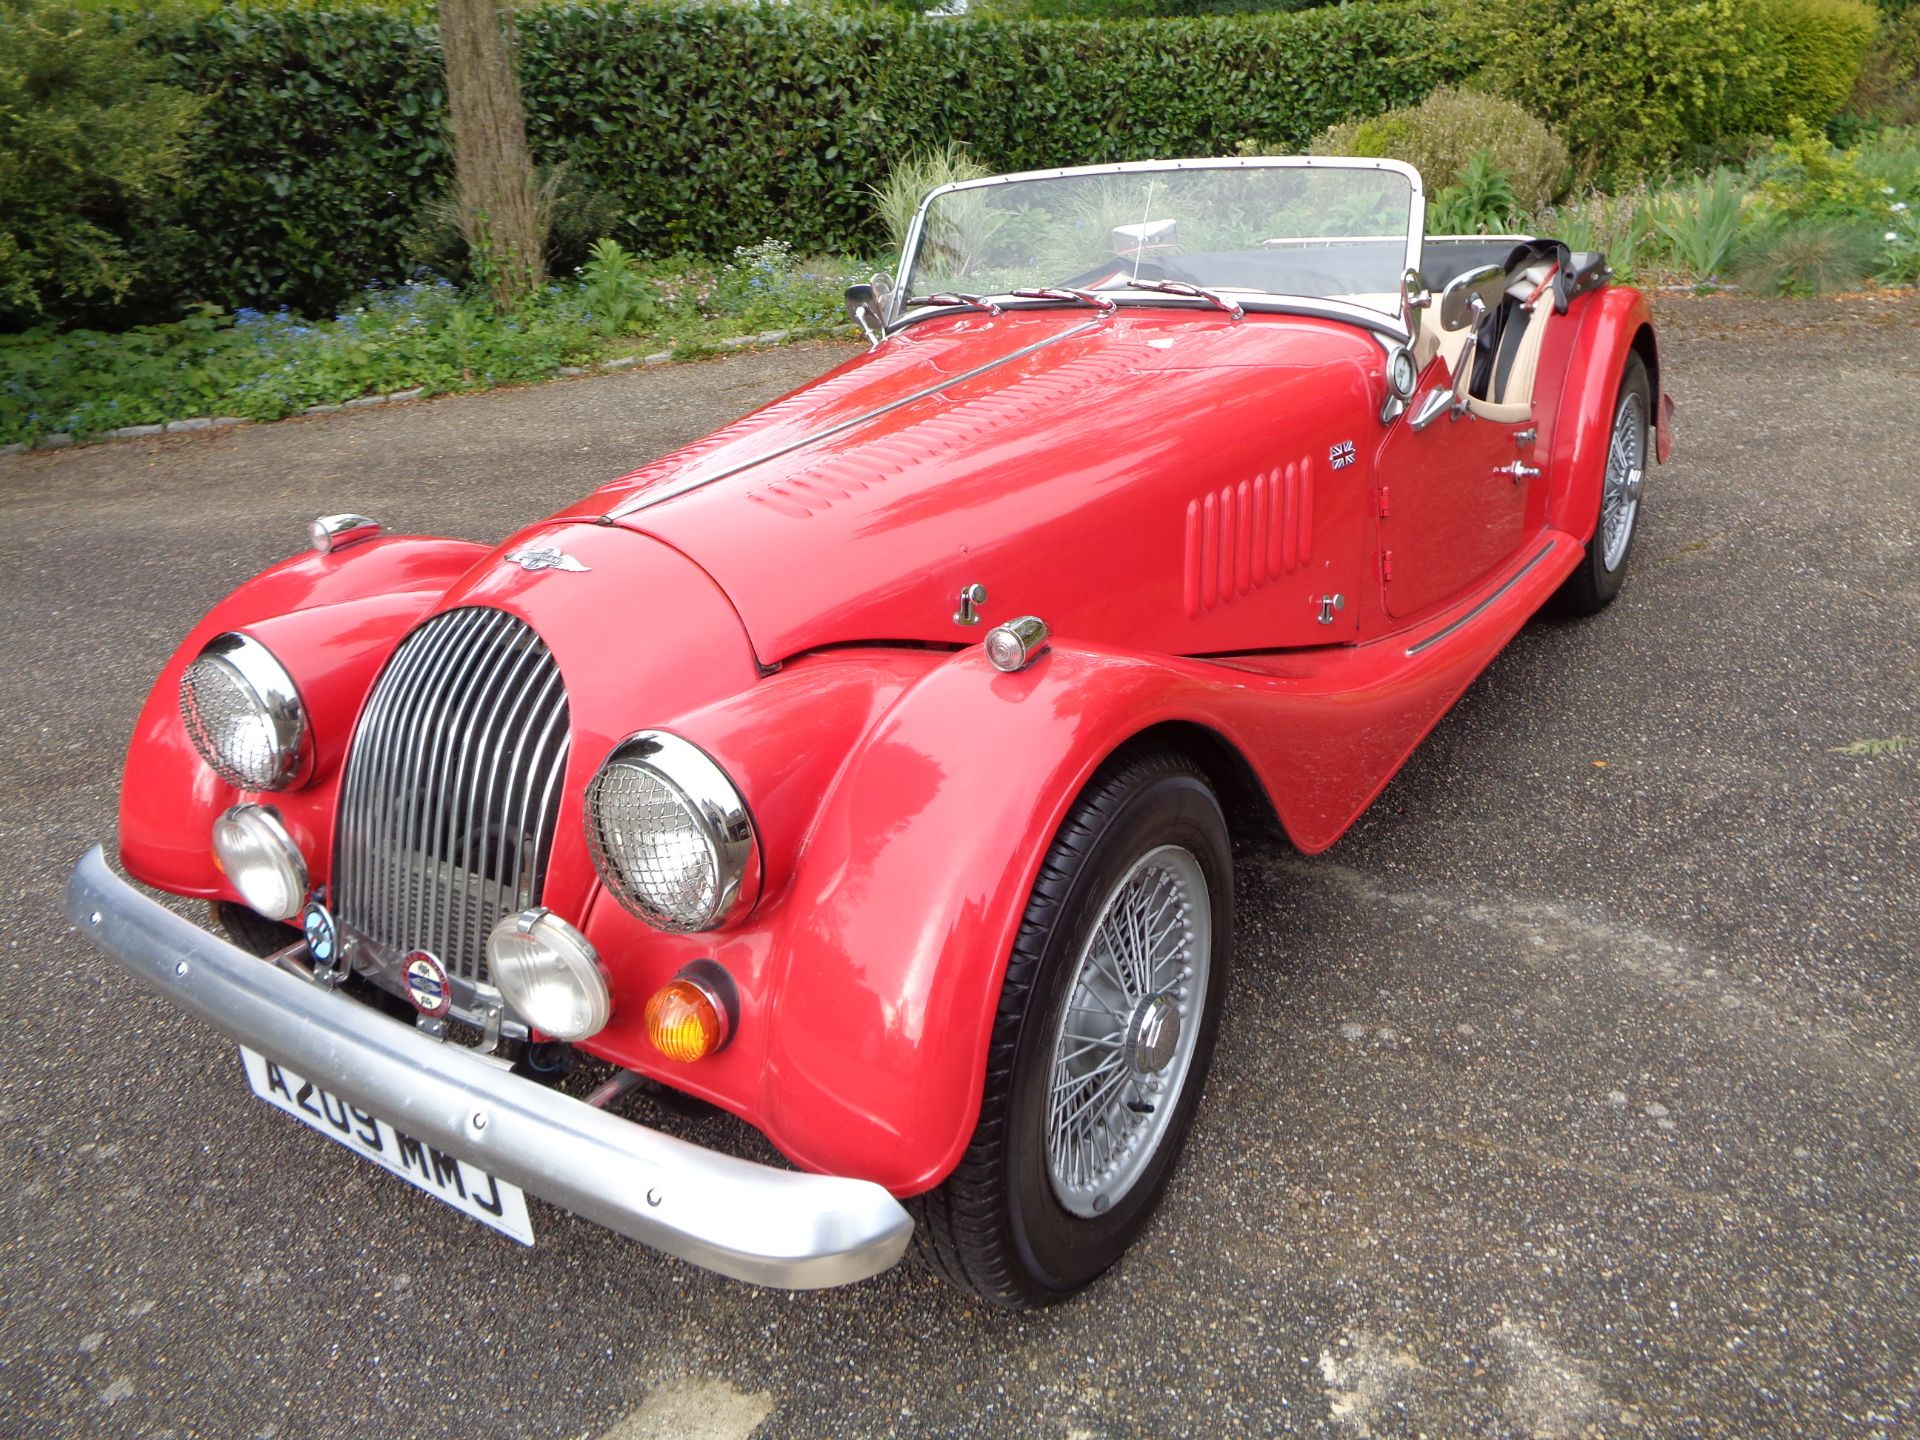 1983 Morgan 4/4 - Un-mistakable style for the British car enthusiast - A true gentleman’s car! - Image 2 of 19